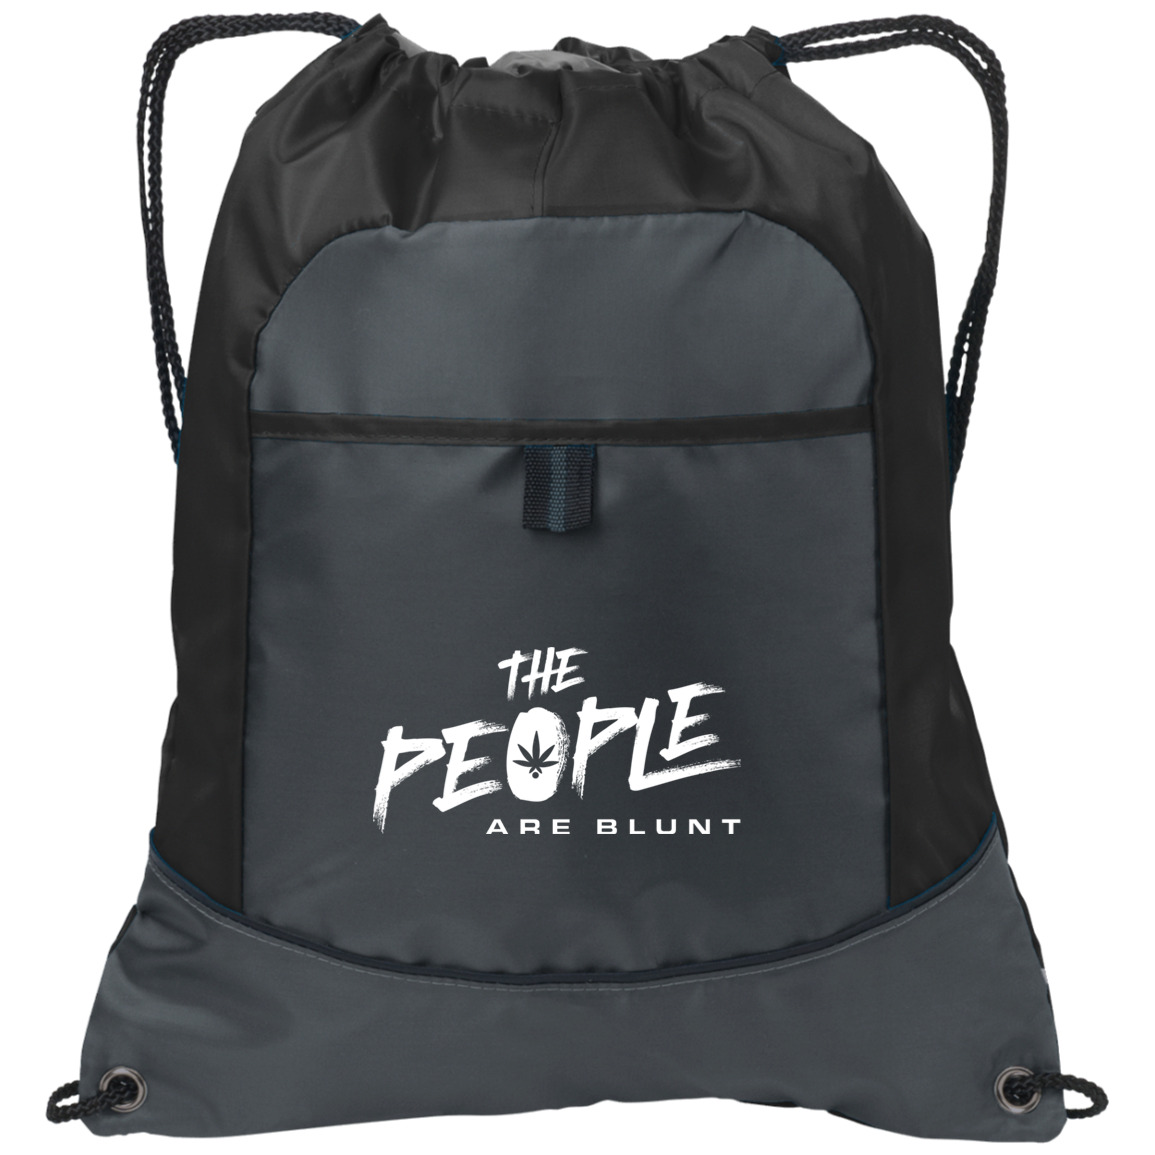 The People's (B) Pocket Cinch Pack